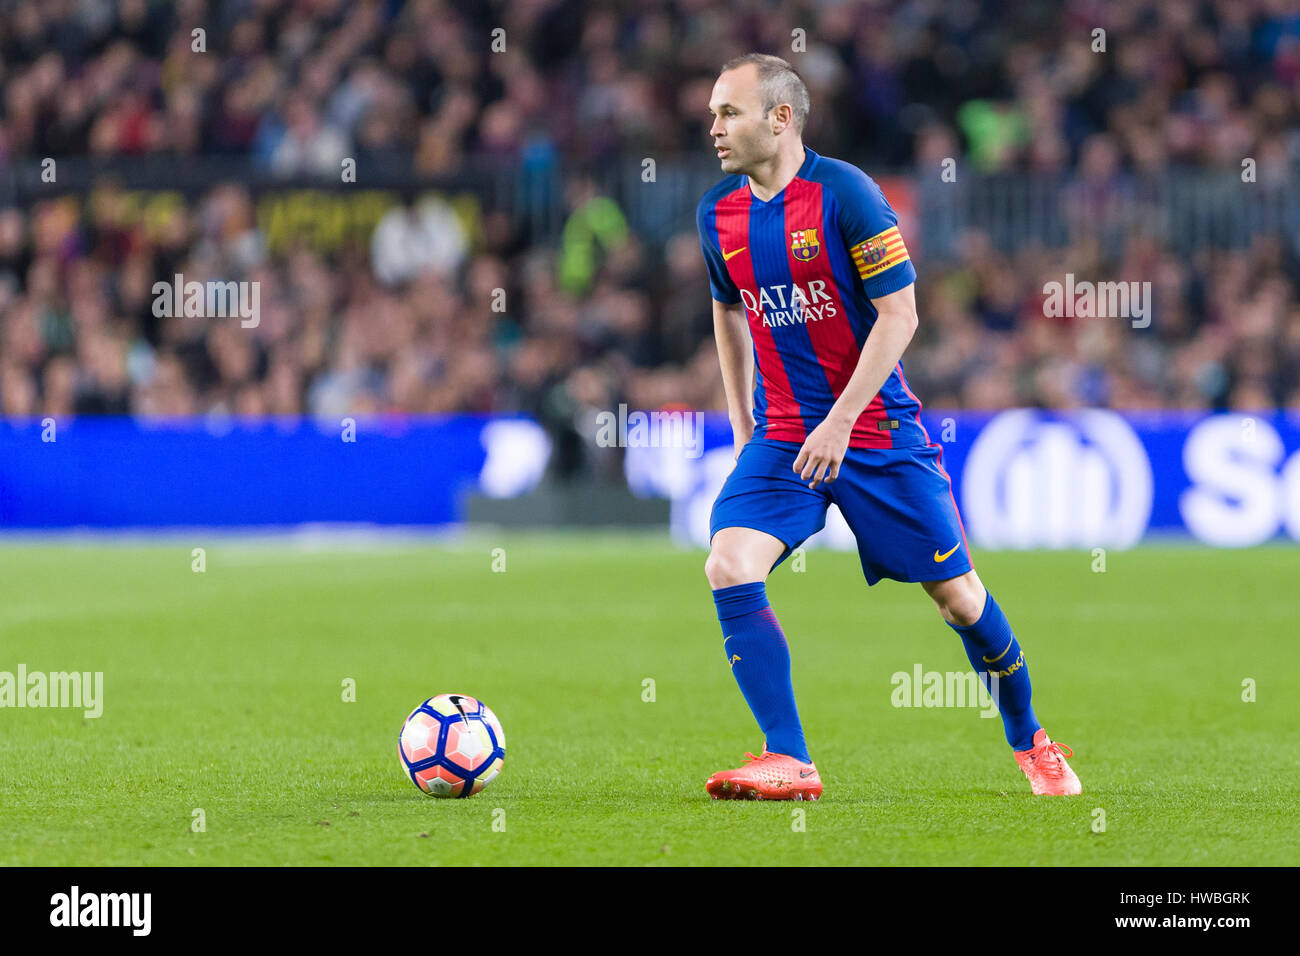 March 19, 2017: Andres Iniesta during the match between FC Barcelona vs Valencia, for the round 28 of the Liga Santander, played at Camp Nou Stadium, Barcelona, Spain, Spain.   Photo: Cronos/Urbanandsport Stock Photo